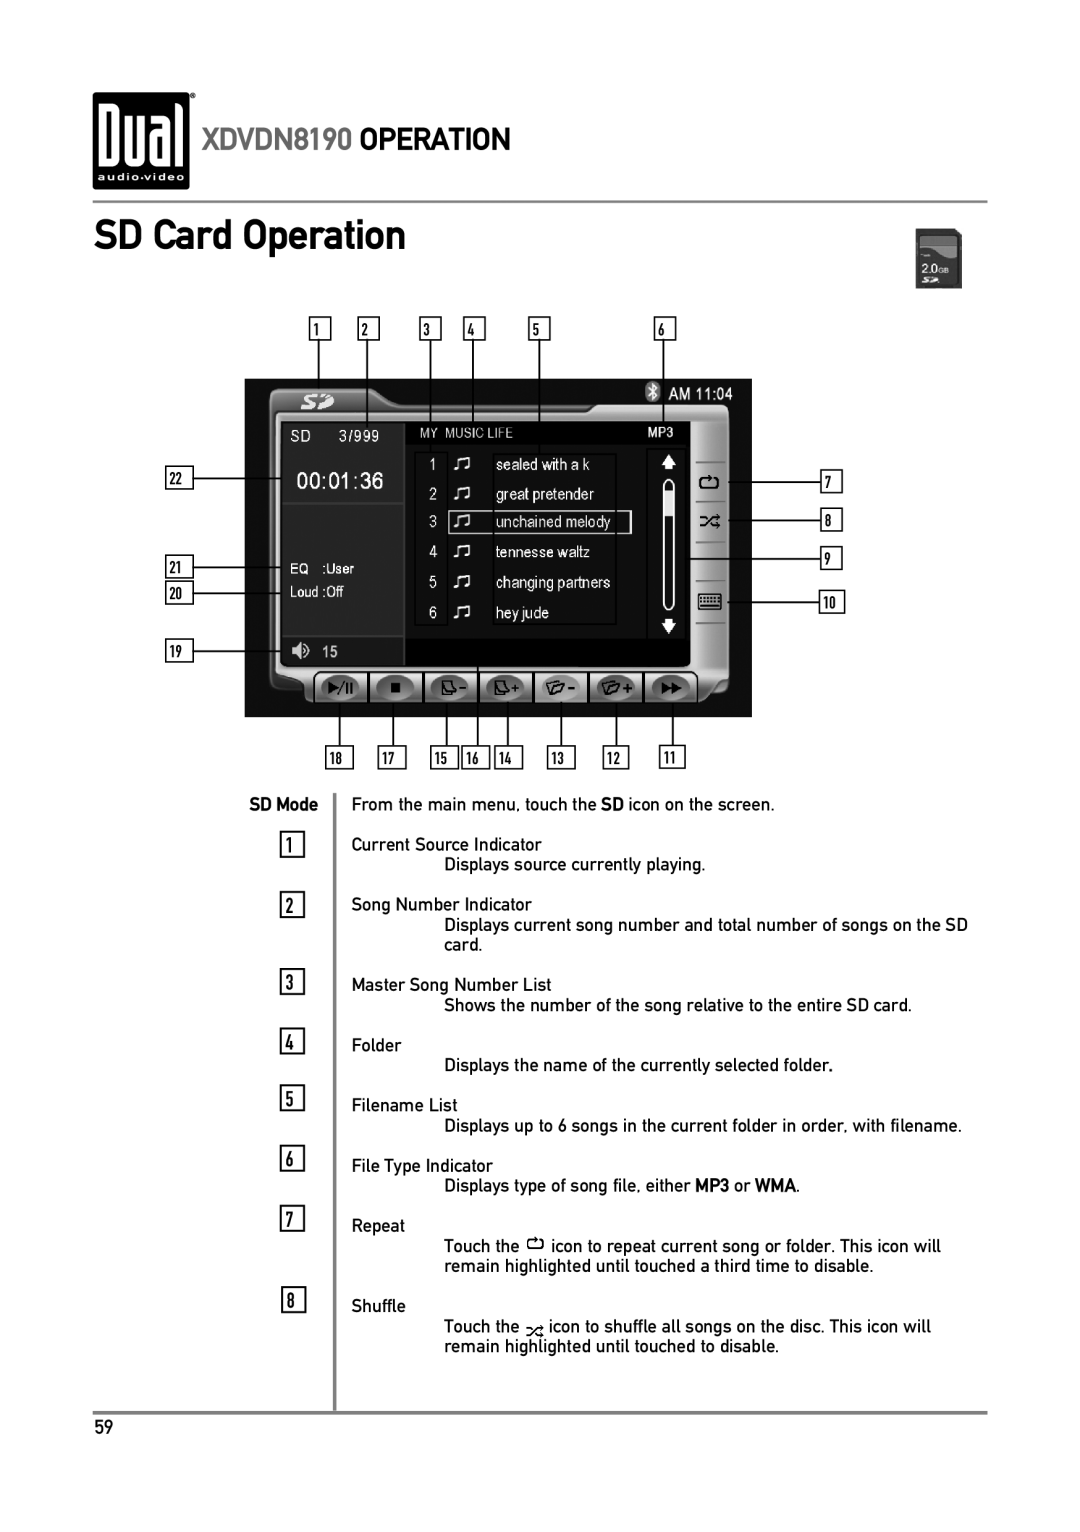 Dual owner manual SD Card Operation, XDVDN8190 OPERATION 